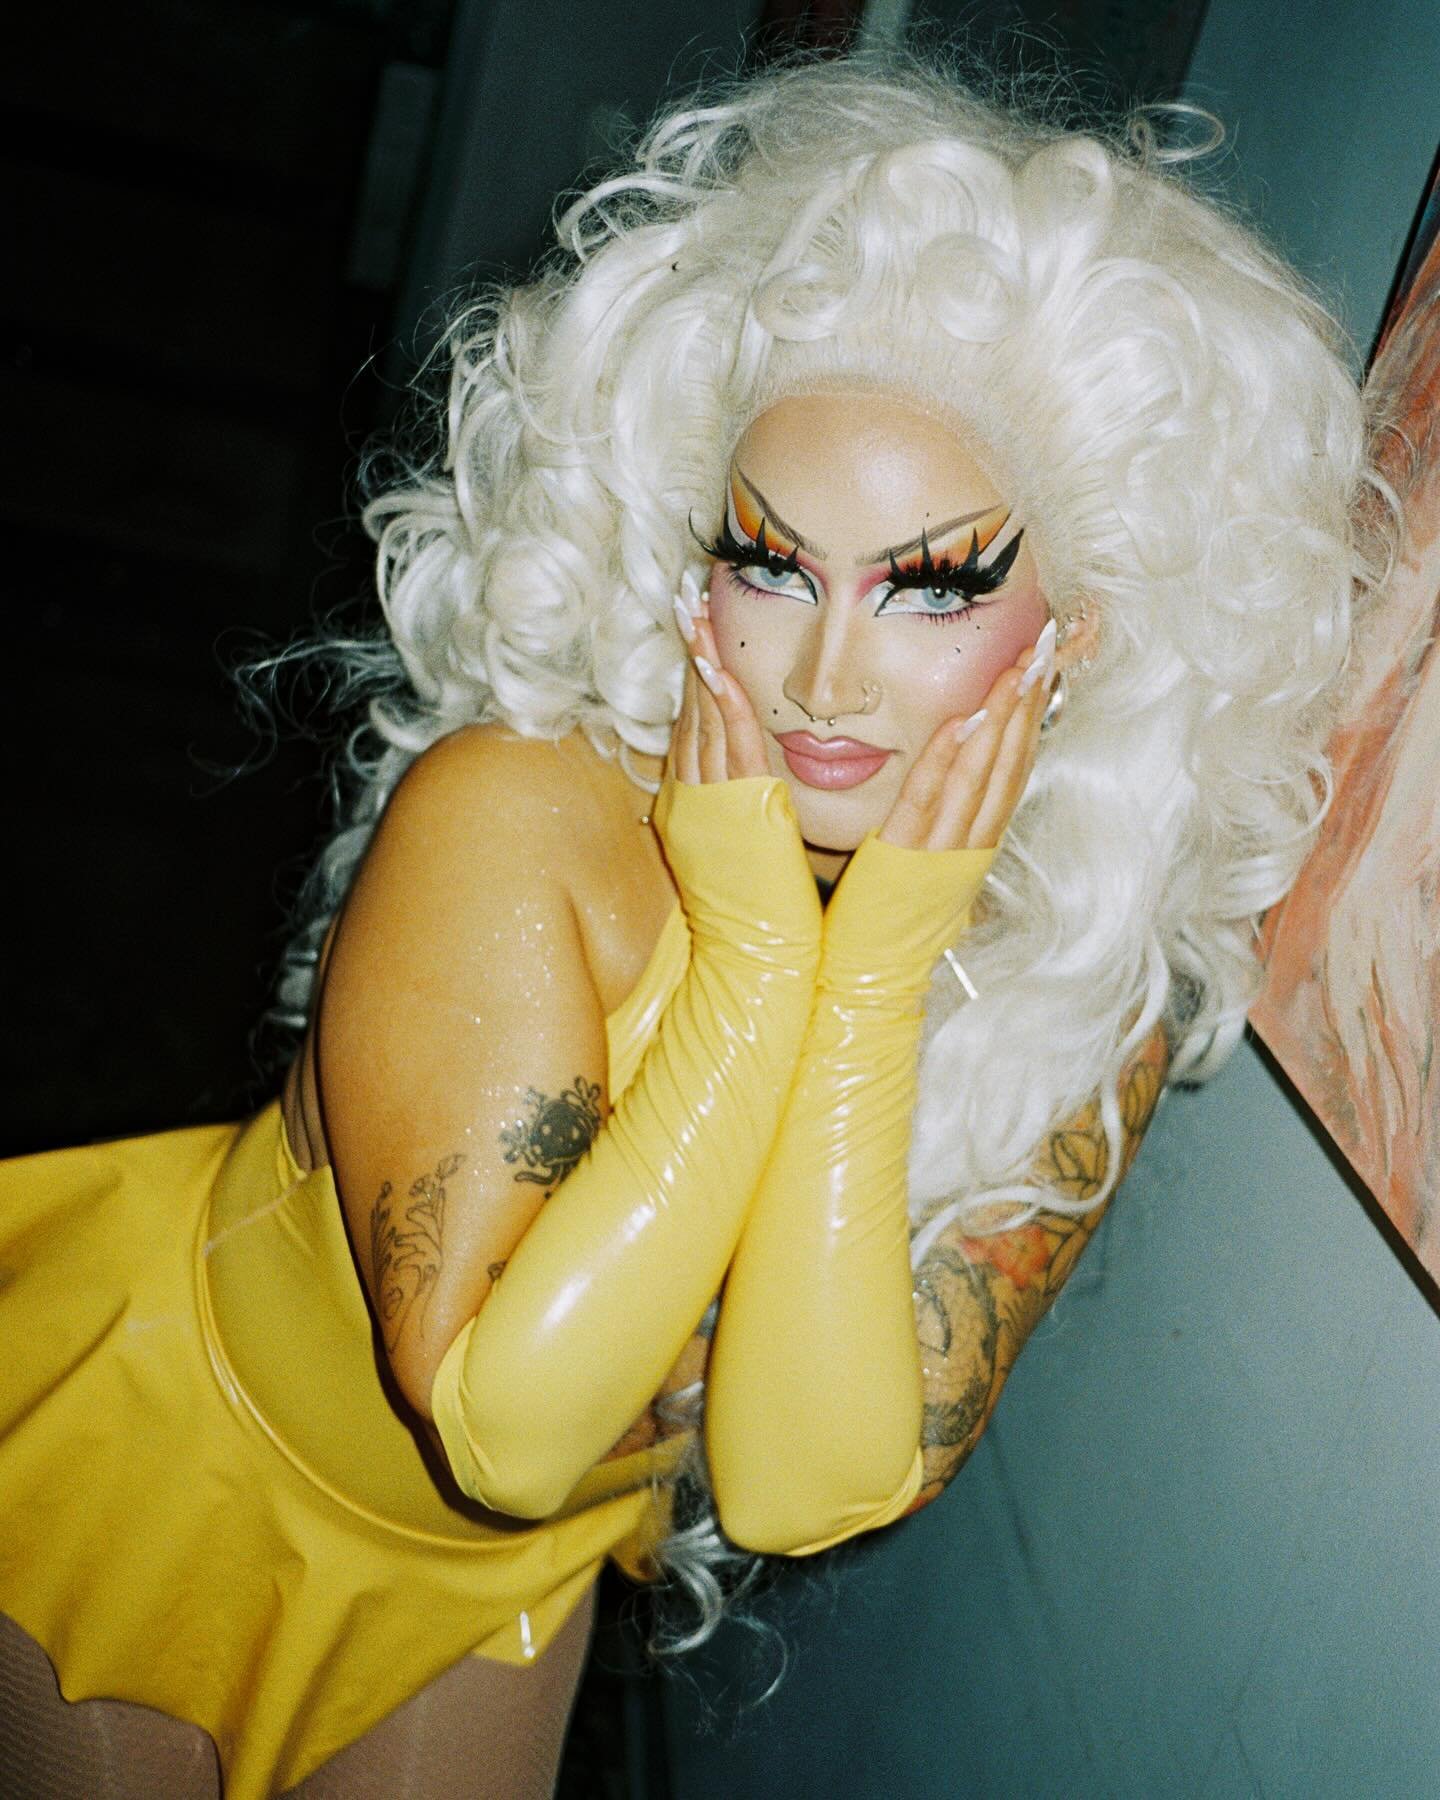 March Angel Hour 🍀 @candidlyaustin&rsquo;s monthly drag show at @zoetropolis immortalized on 35mm film 

What I love about film is the wait. The surprise of seeing what you captured for the first time. I was emotional looking at all the photos I got